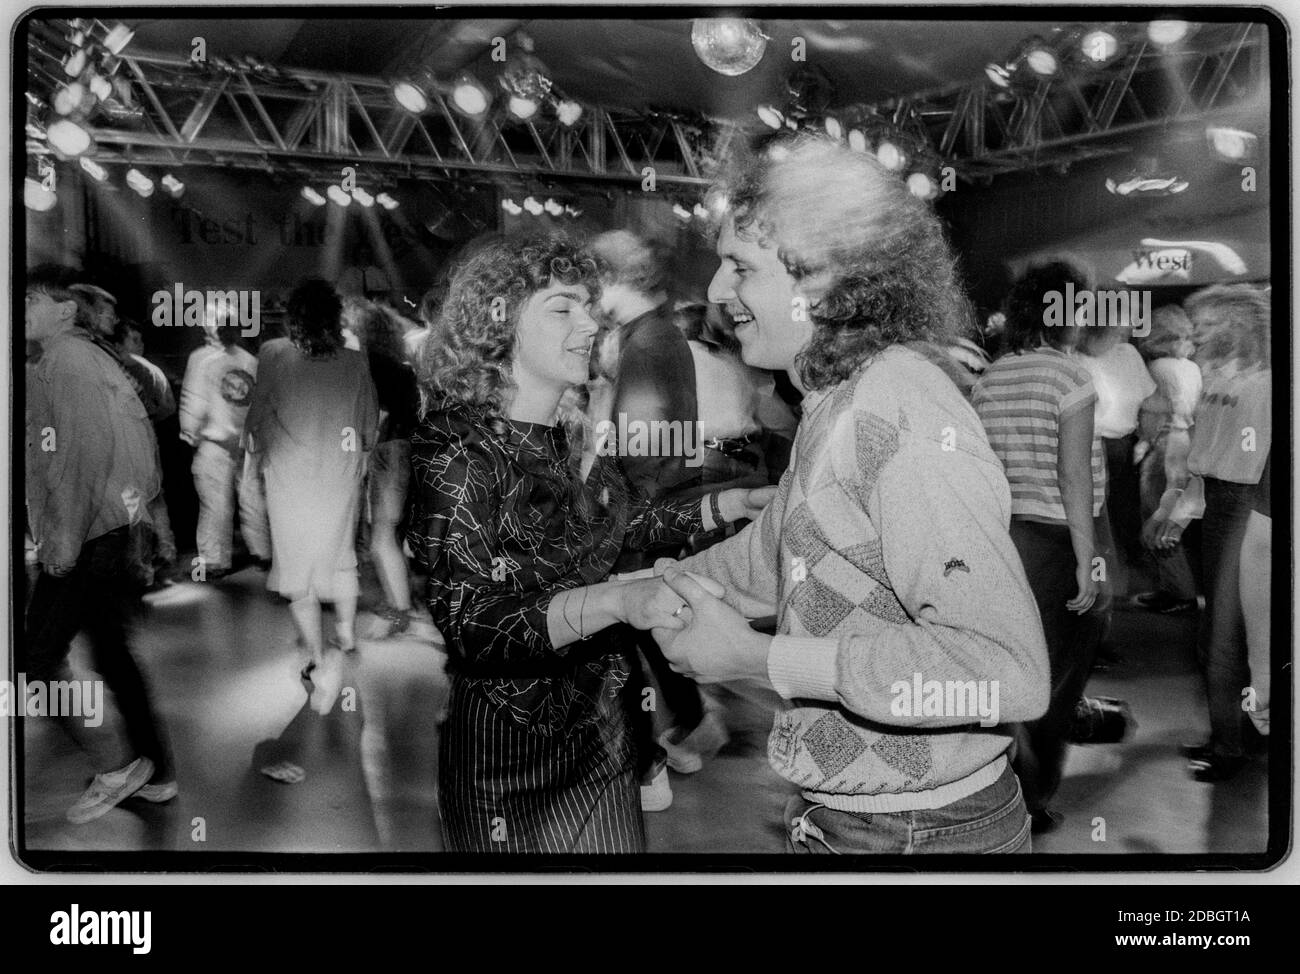 East Germany 1990 scanned in 2020 Rostock on the Baltic coast. Young people enjoy a dance at the Disco sponsered by West cigarettes in 1990 East Germany, Deutsche Demokratische Republik the DDR after the fall of the Wall but before reunification March 1990 and scanned in 2020.East Germany, officially the German Democratic Republic, was a country that existed from 1949 to 1990, the period when the eastern portion of Germany was part of the Eastern Bloc during the Cold War. Stock Photo